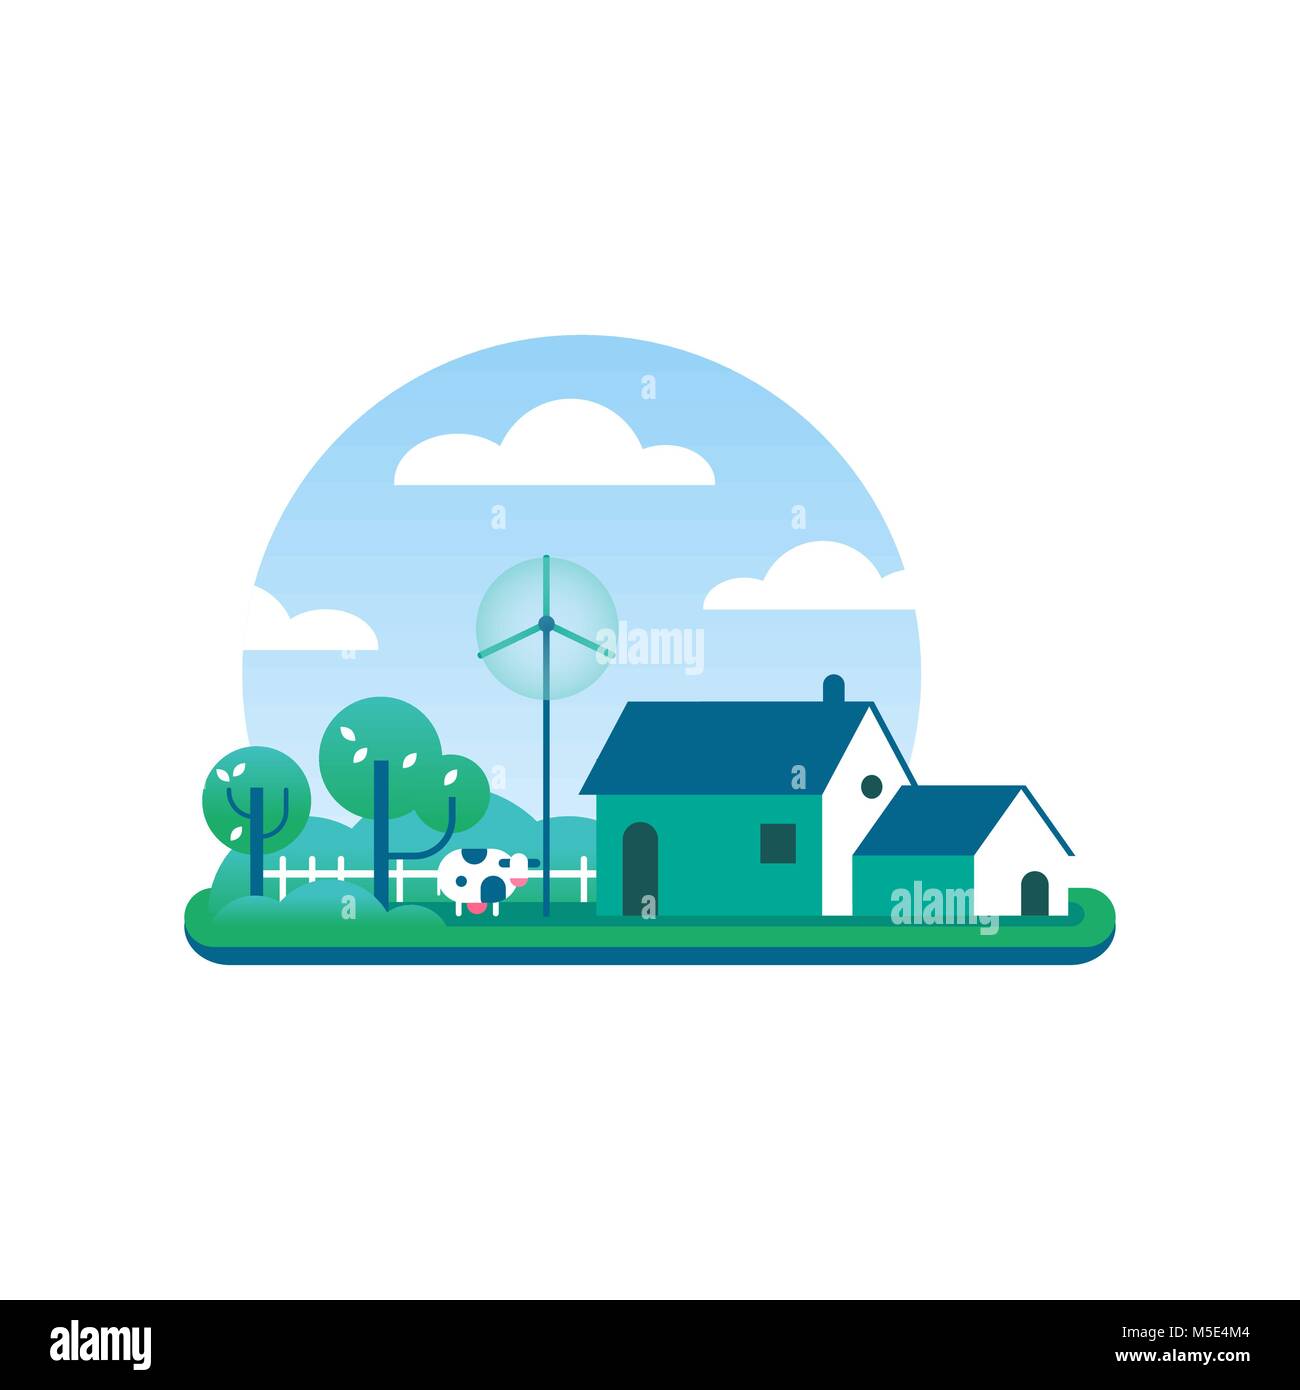 Eco friendly farm house illustration, rural building in flat art style with cow, barn, wind turbine and trees. Sustainable agriculture lifestyle conce Stock Vector